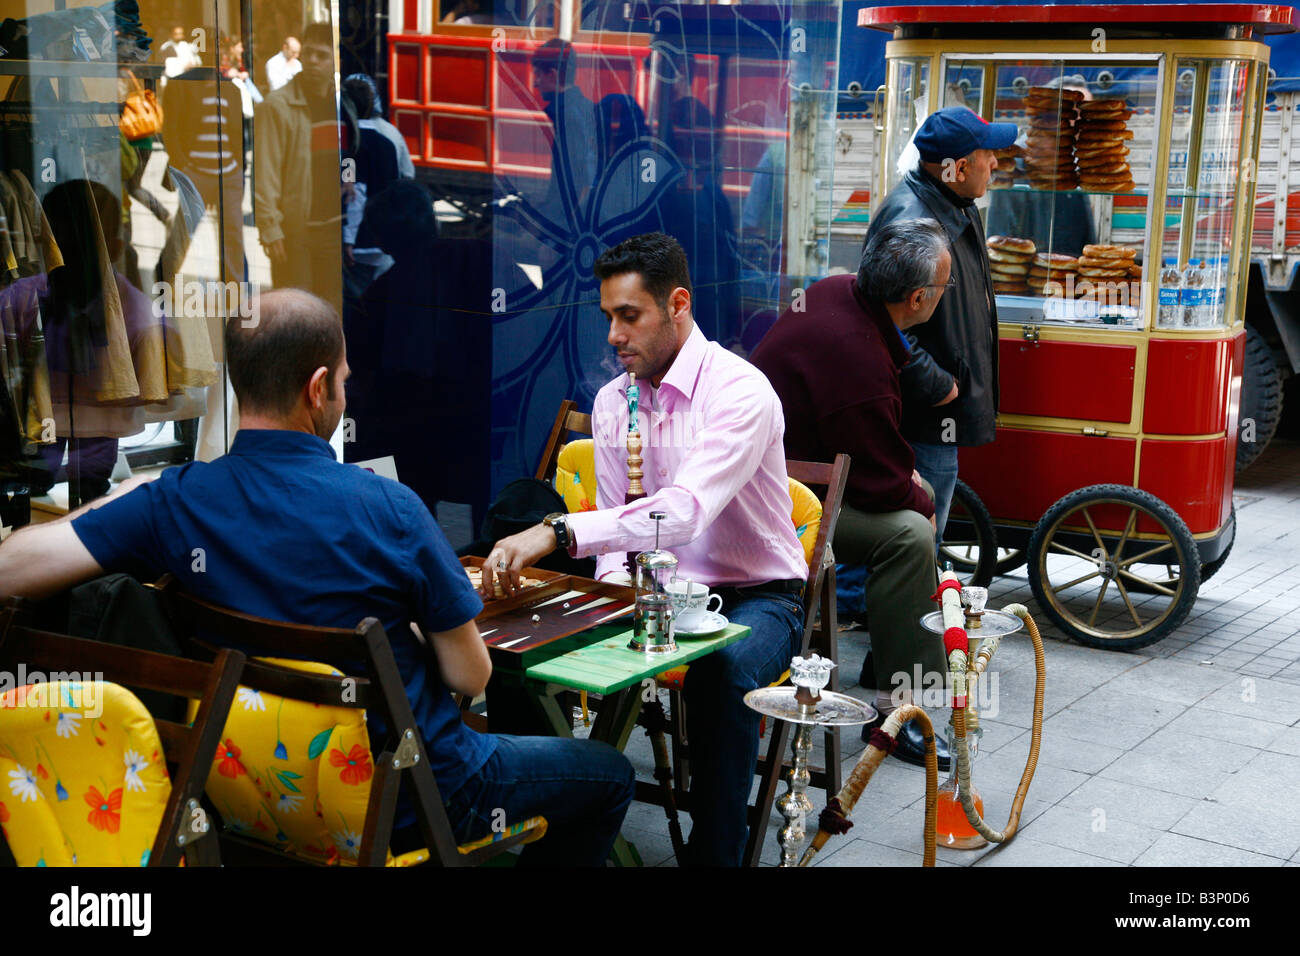 May 2008 - People sitting at a outdoors cafe near Istiklal street Istanbul Turkey Stock Photo